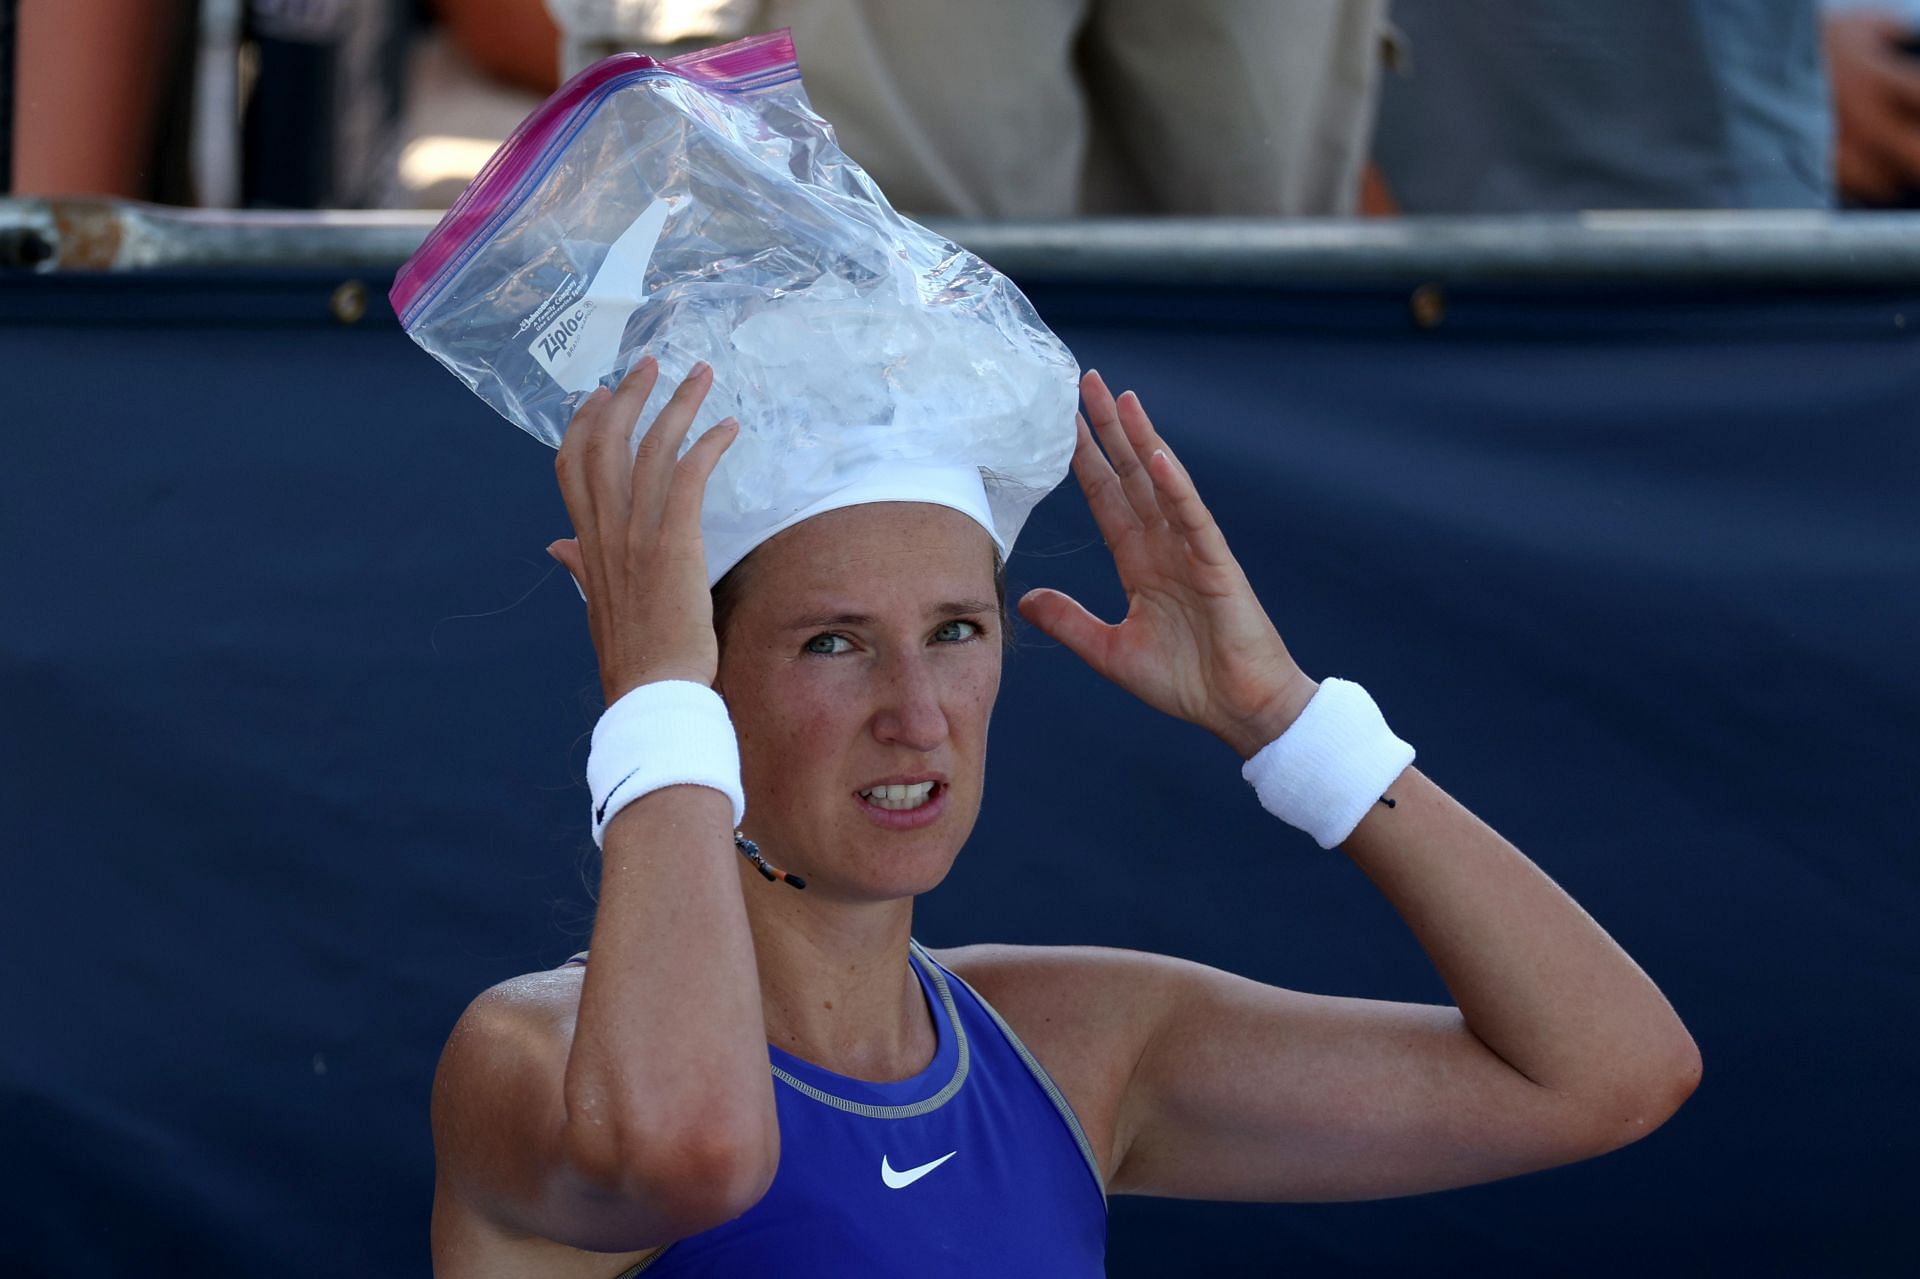 Victoria Azarenka recently spoke about the Wimbledon ban on Russian and Belarusian players